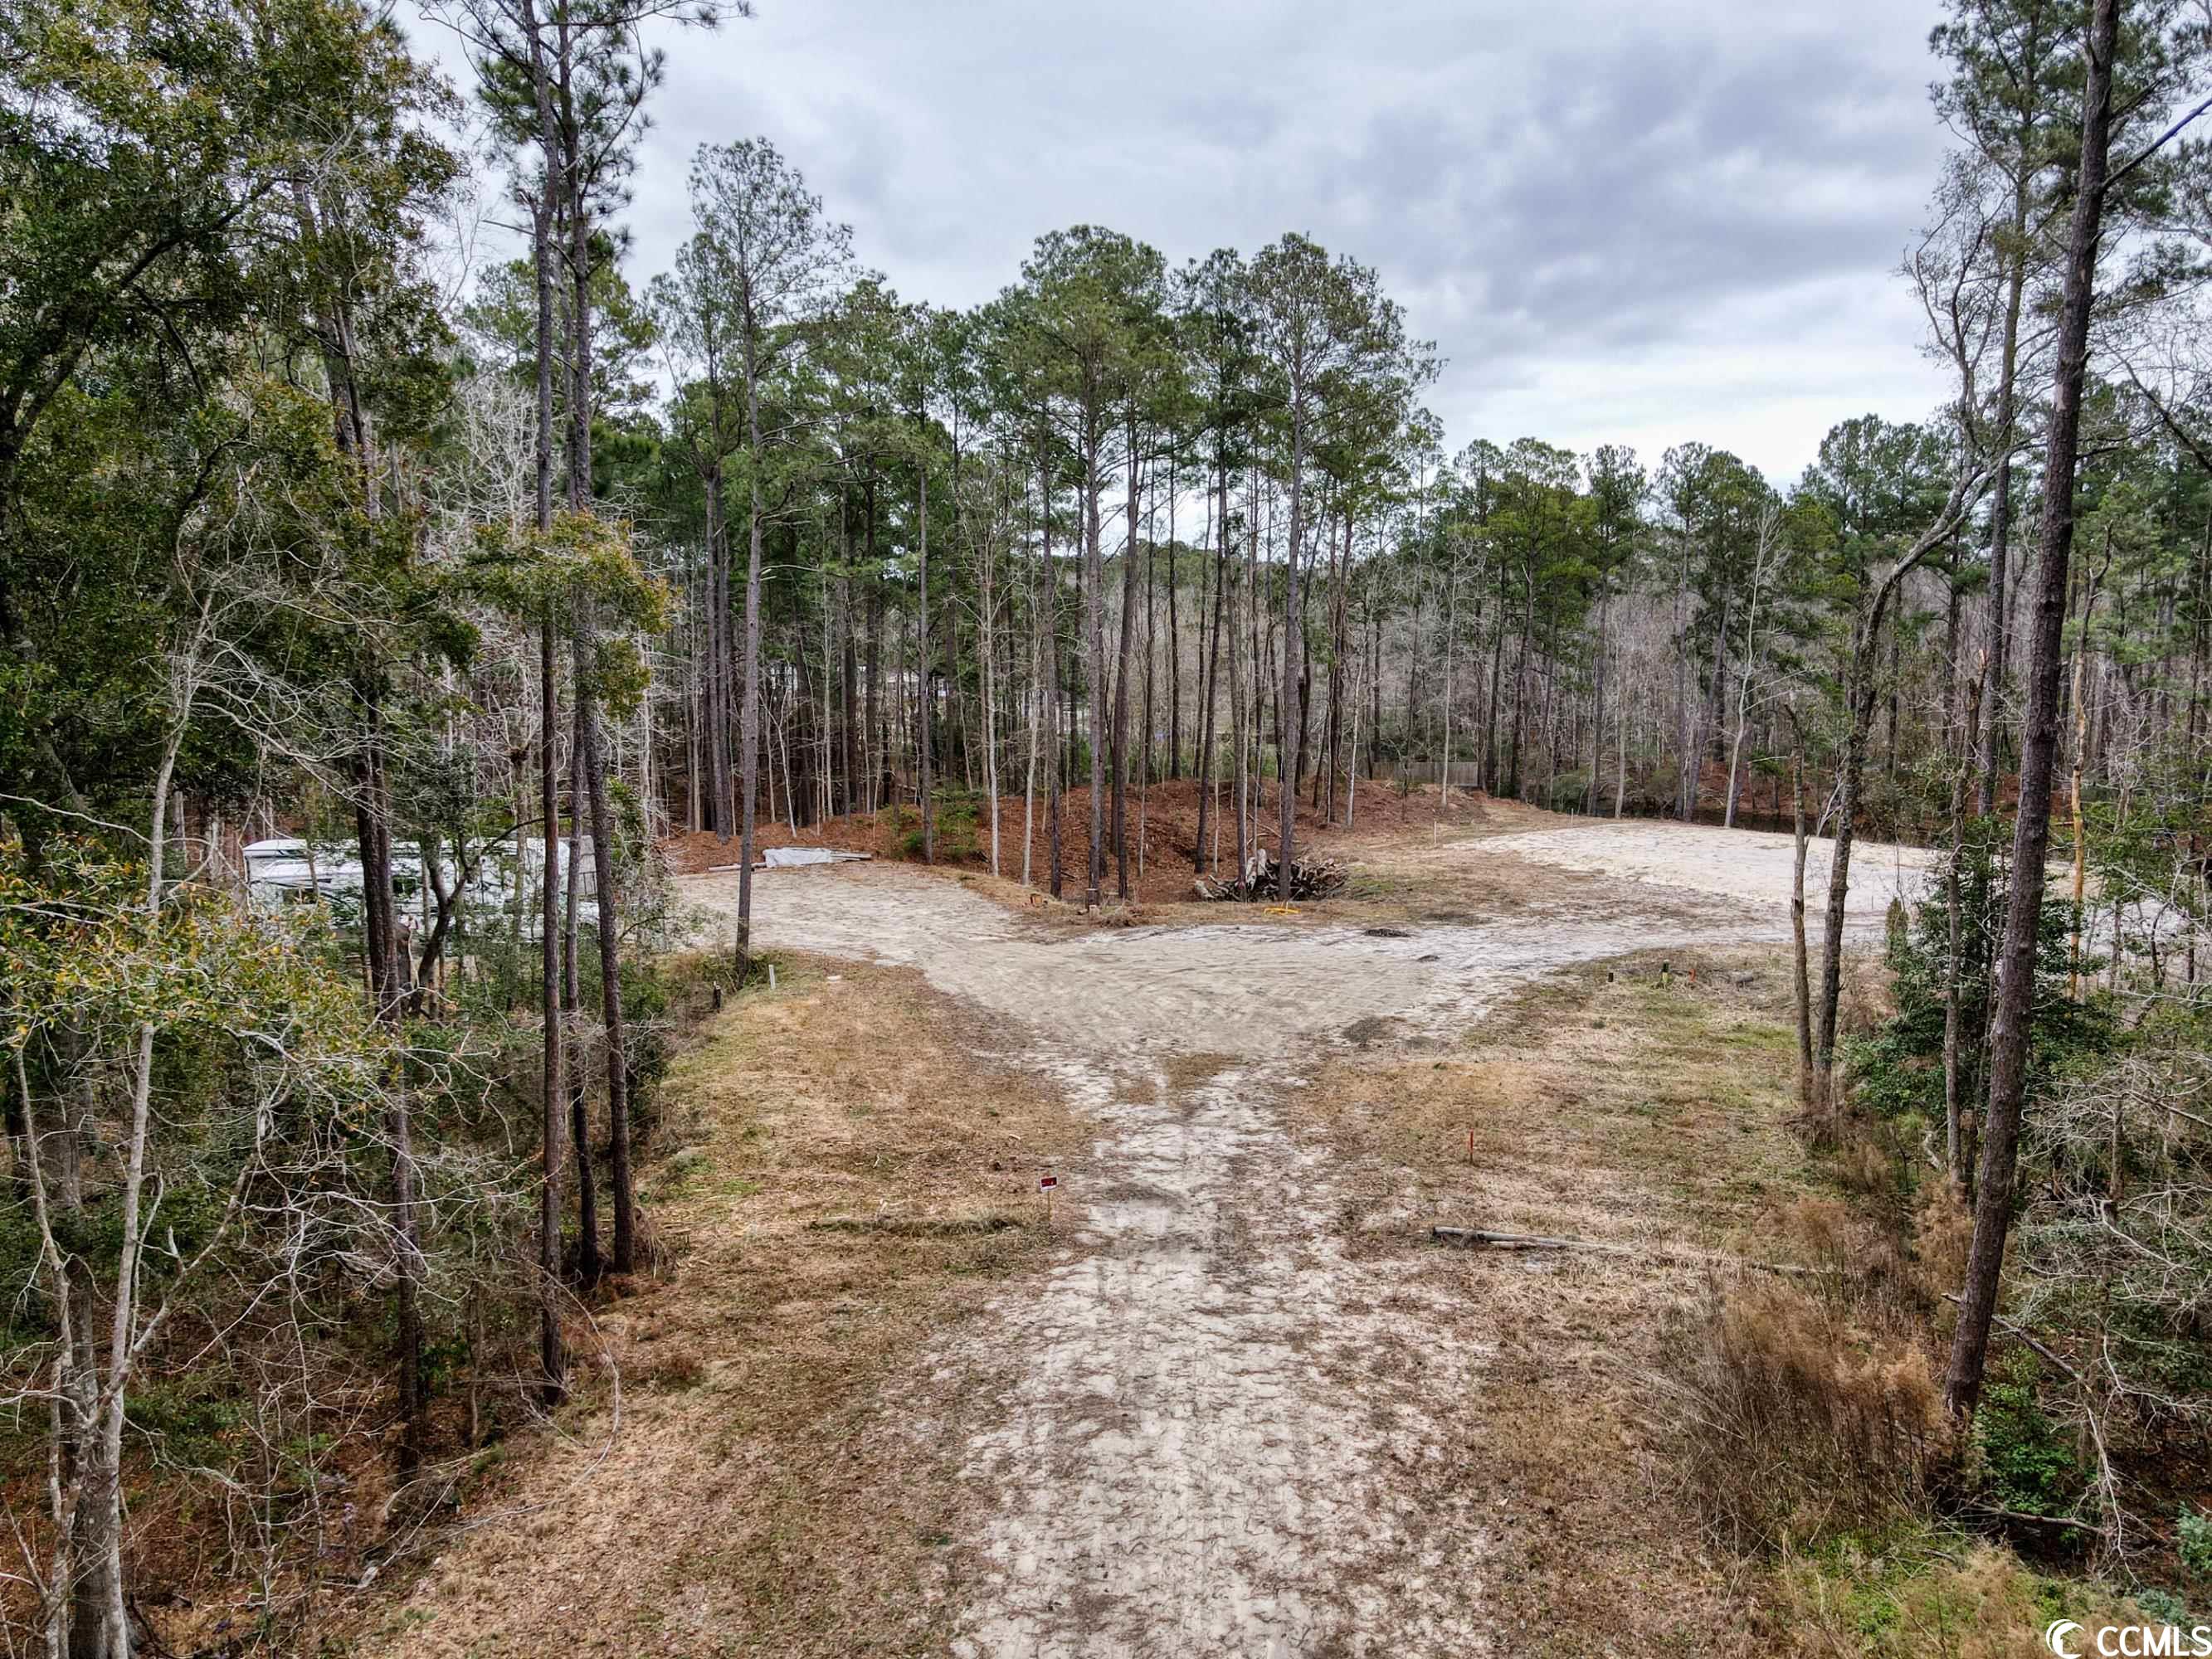 very private over 1-acre with no hoa.  the property is in a flood zone however the seller and his partner have owned it since 2016 and had no flooding from the storms during their ownership. building pad is 75 front 57 on sides.  made of good dirt.  pad sites at about 15'5" high.  with a 4-block high crawl under the house.  30 x 30 shop area built with root mat.  owner had lots 17 and 18 combined to an over one-acre lot only needing one grinder pump.  gsws will allow that with toilet in shop.  power is at the end of the road. fenced 2,300 sq. ft of storage area with a lifetime 8 x 20 shed in it.  fence only 3-years old.  zoned for modular or stick built only, no trailers.  very private lot surrounded by canal on two sides.